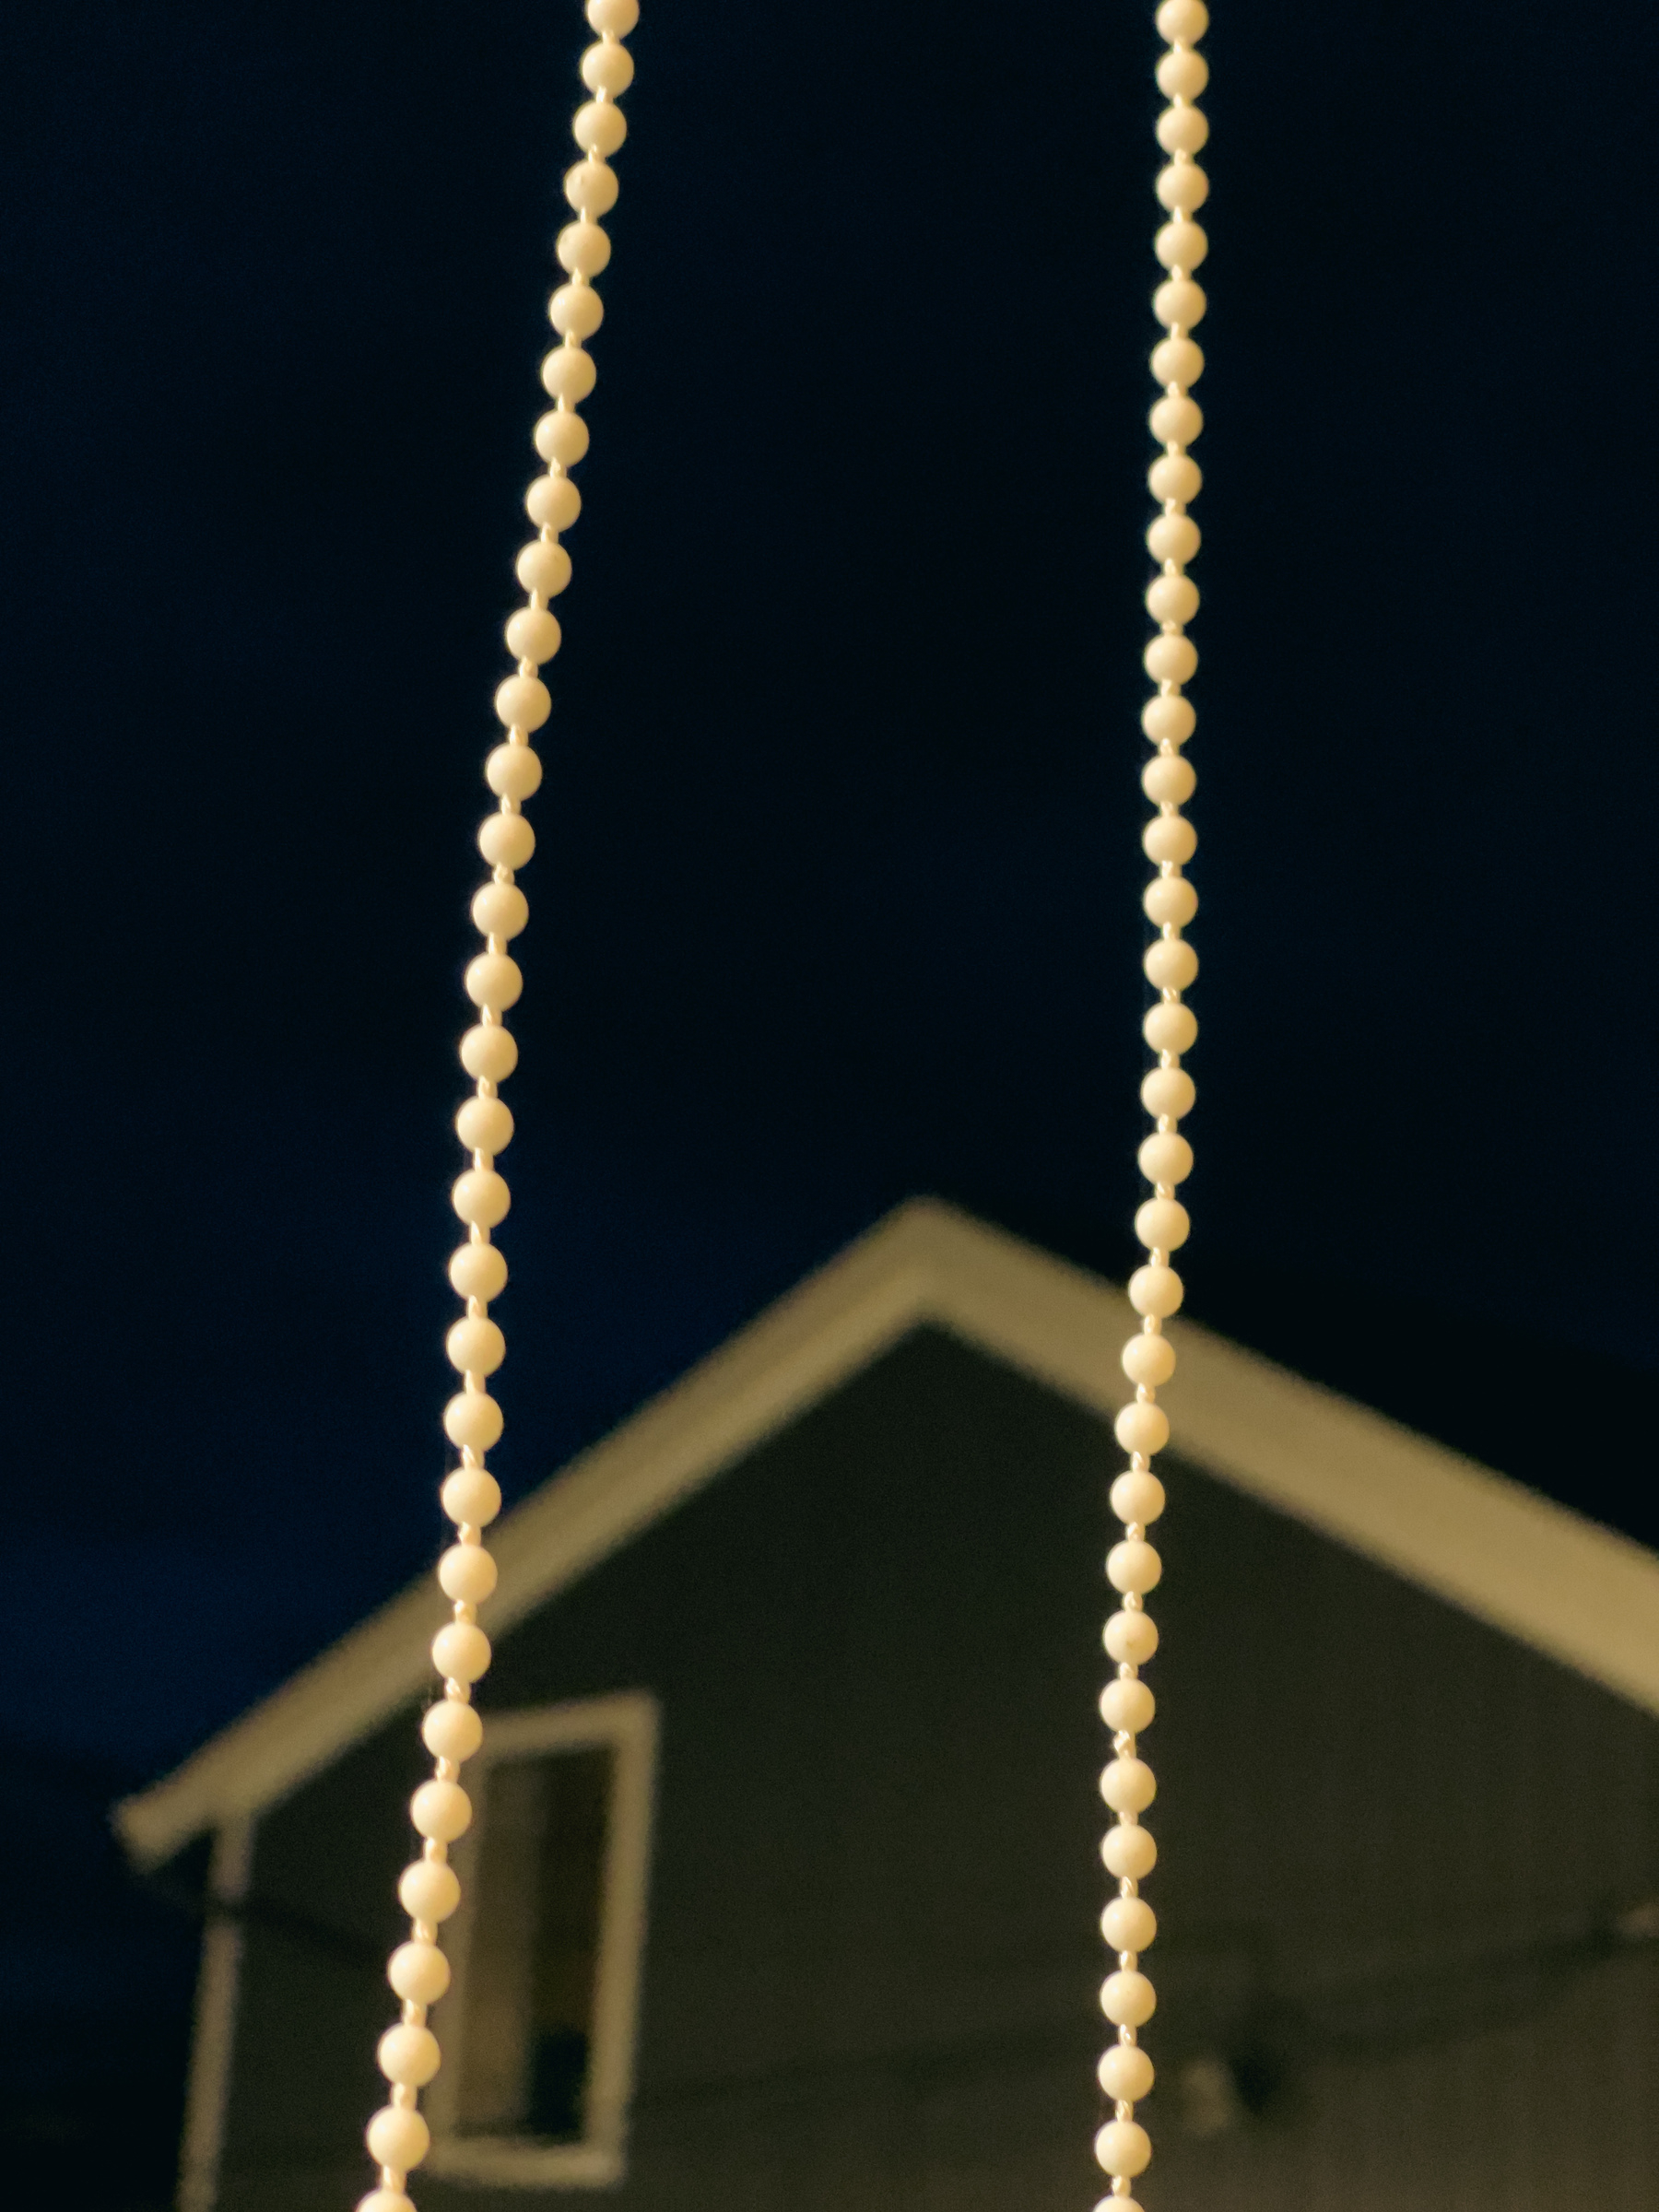 Two strings of beads dangling from top to bottom with house in background.